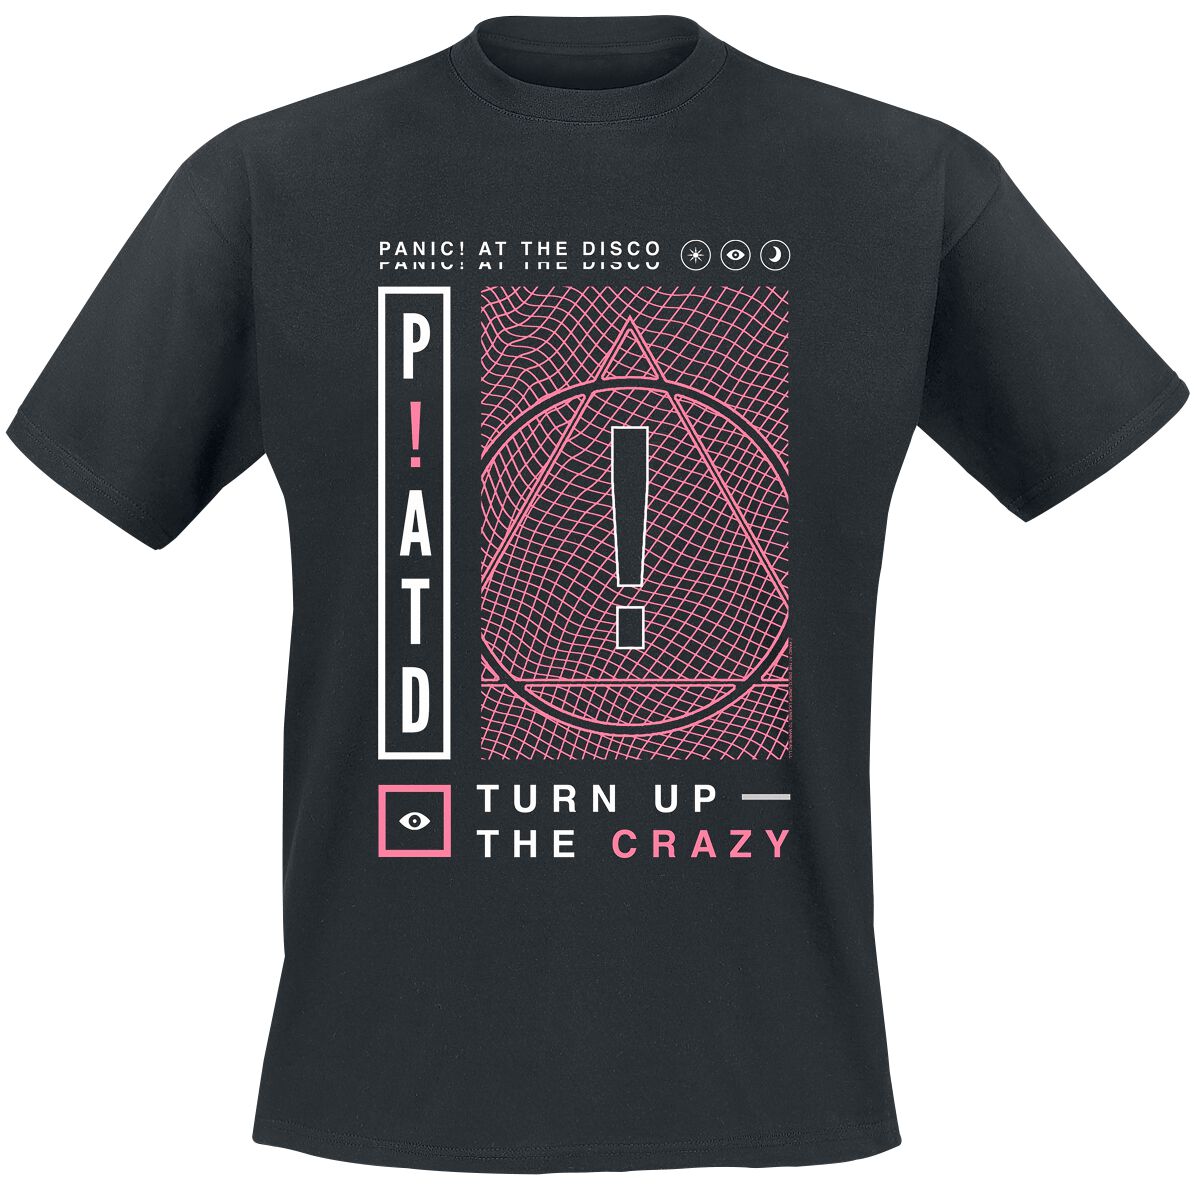 Image of Panic! At The Disco Turn Up The Crazy T-Shirt schwarz